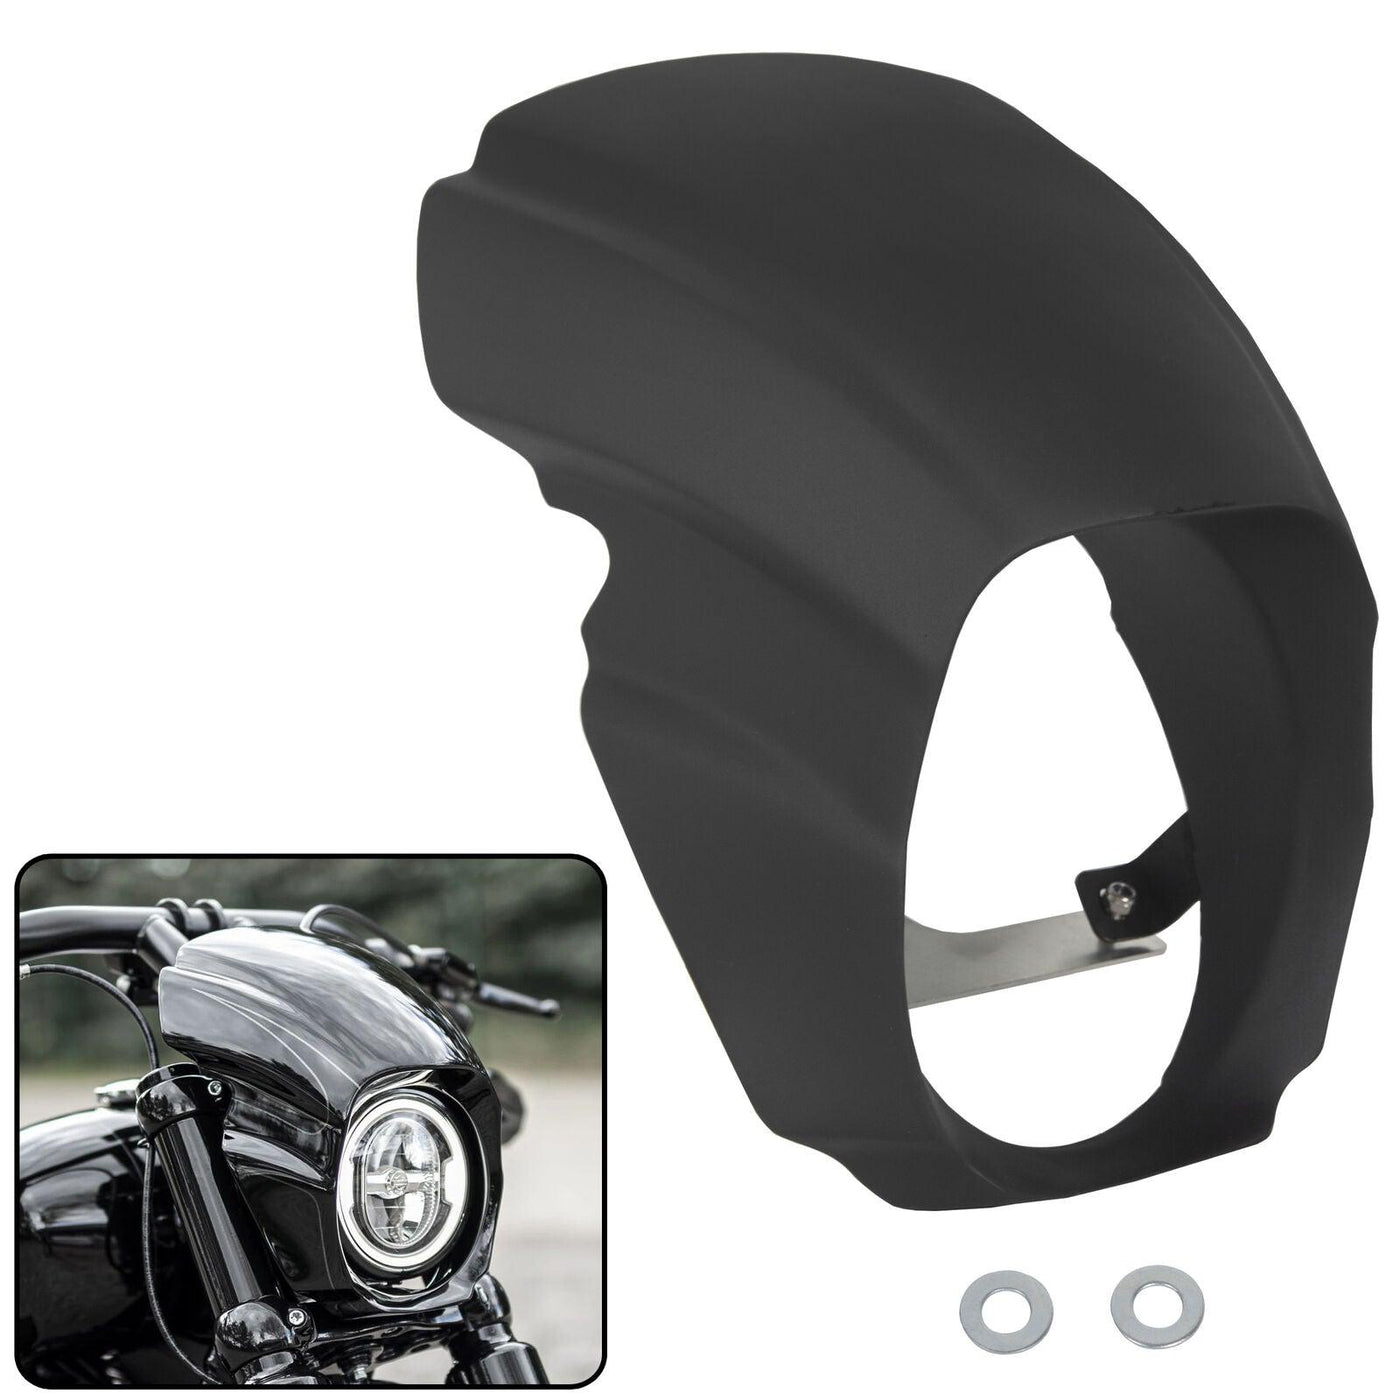 For 18-20 Harley Softail Breakout FXBRS Headlight Fairing Cowl Cover/Cover Mask - Moto Life Products